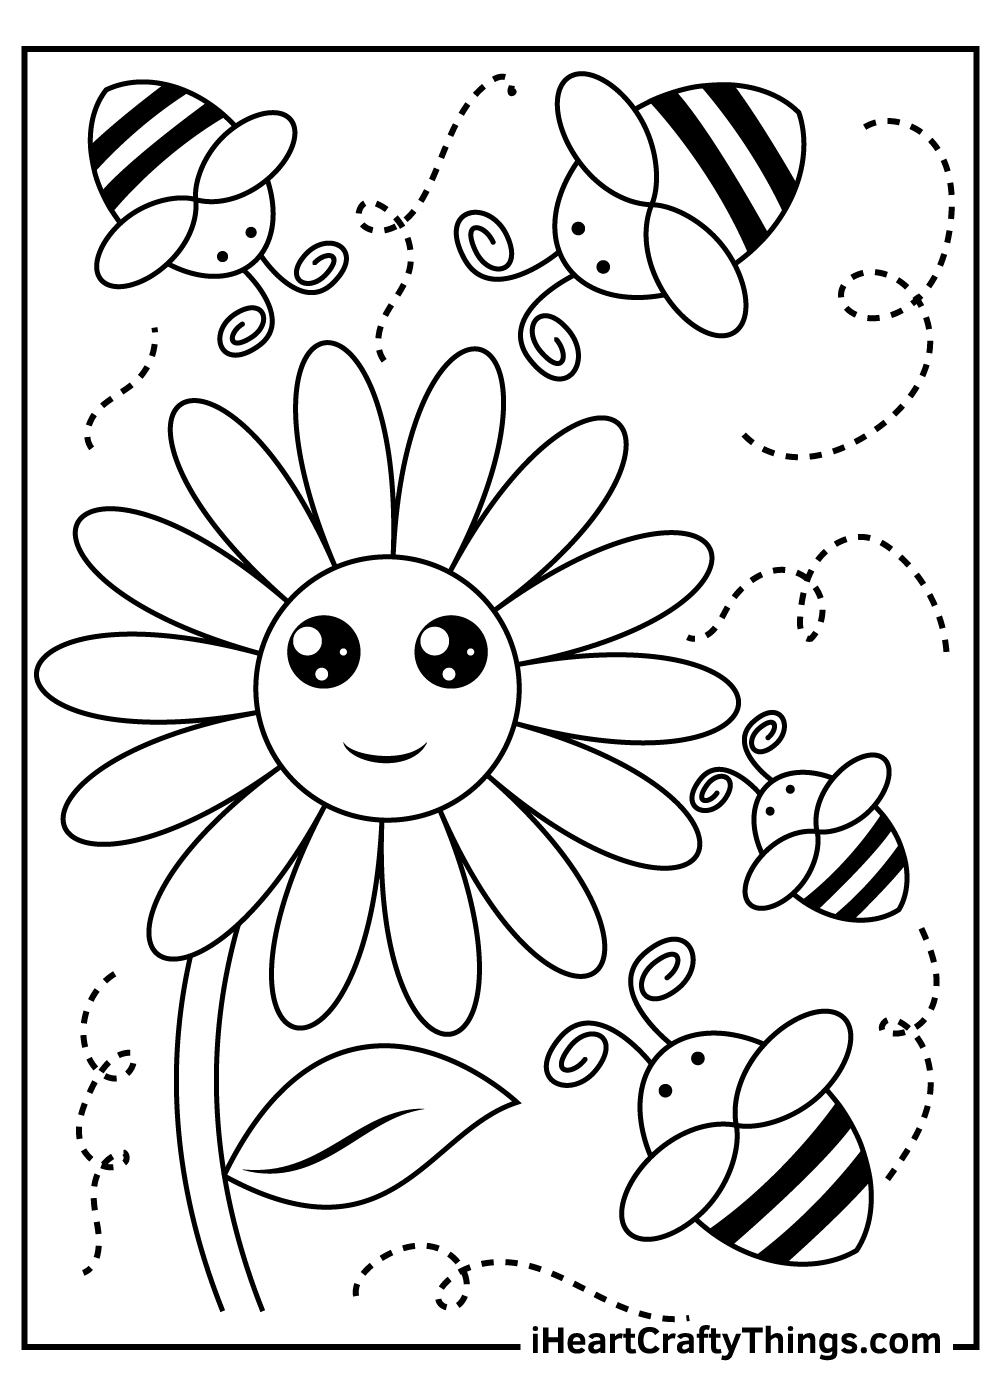 Bee Coloring Pages (Updated 2021)